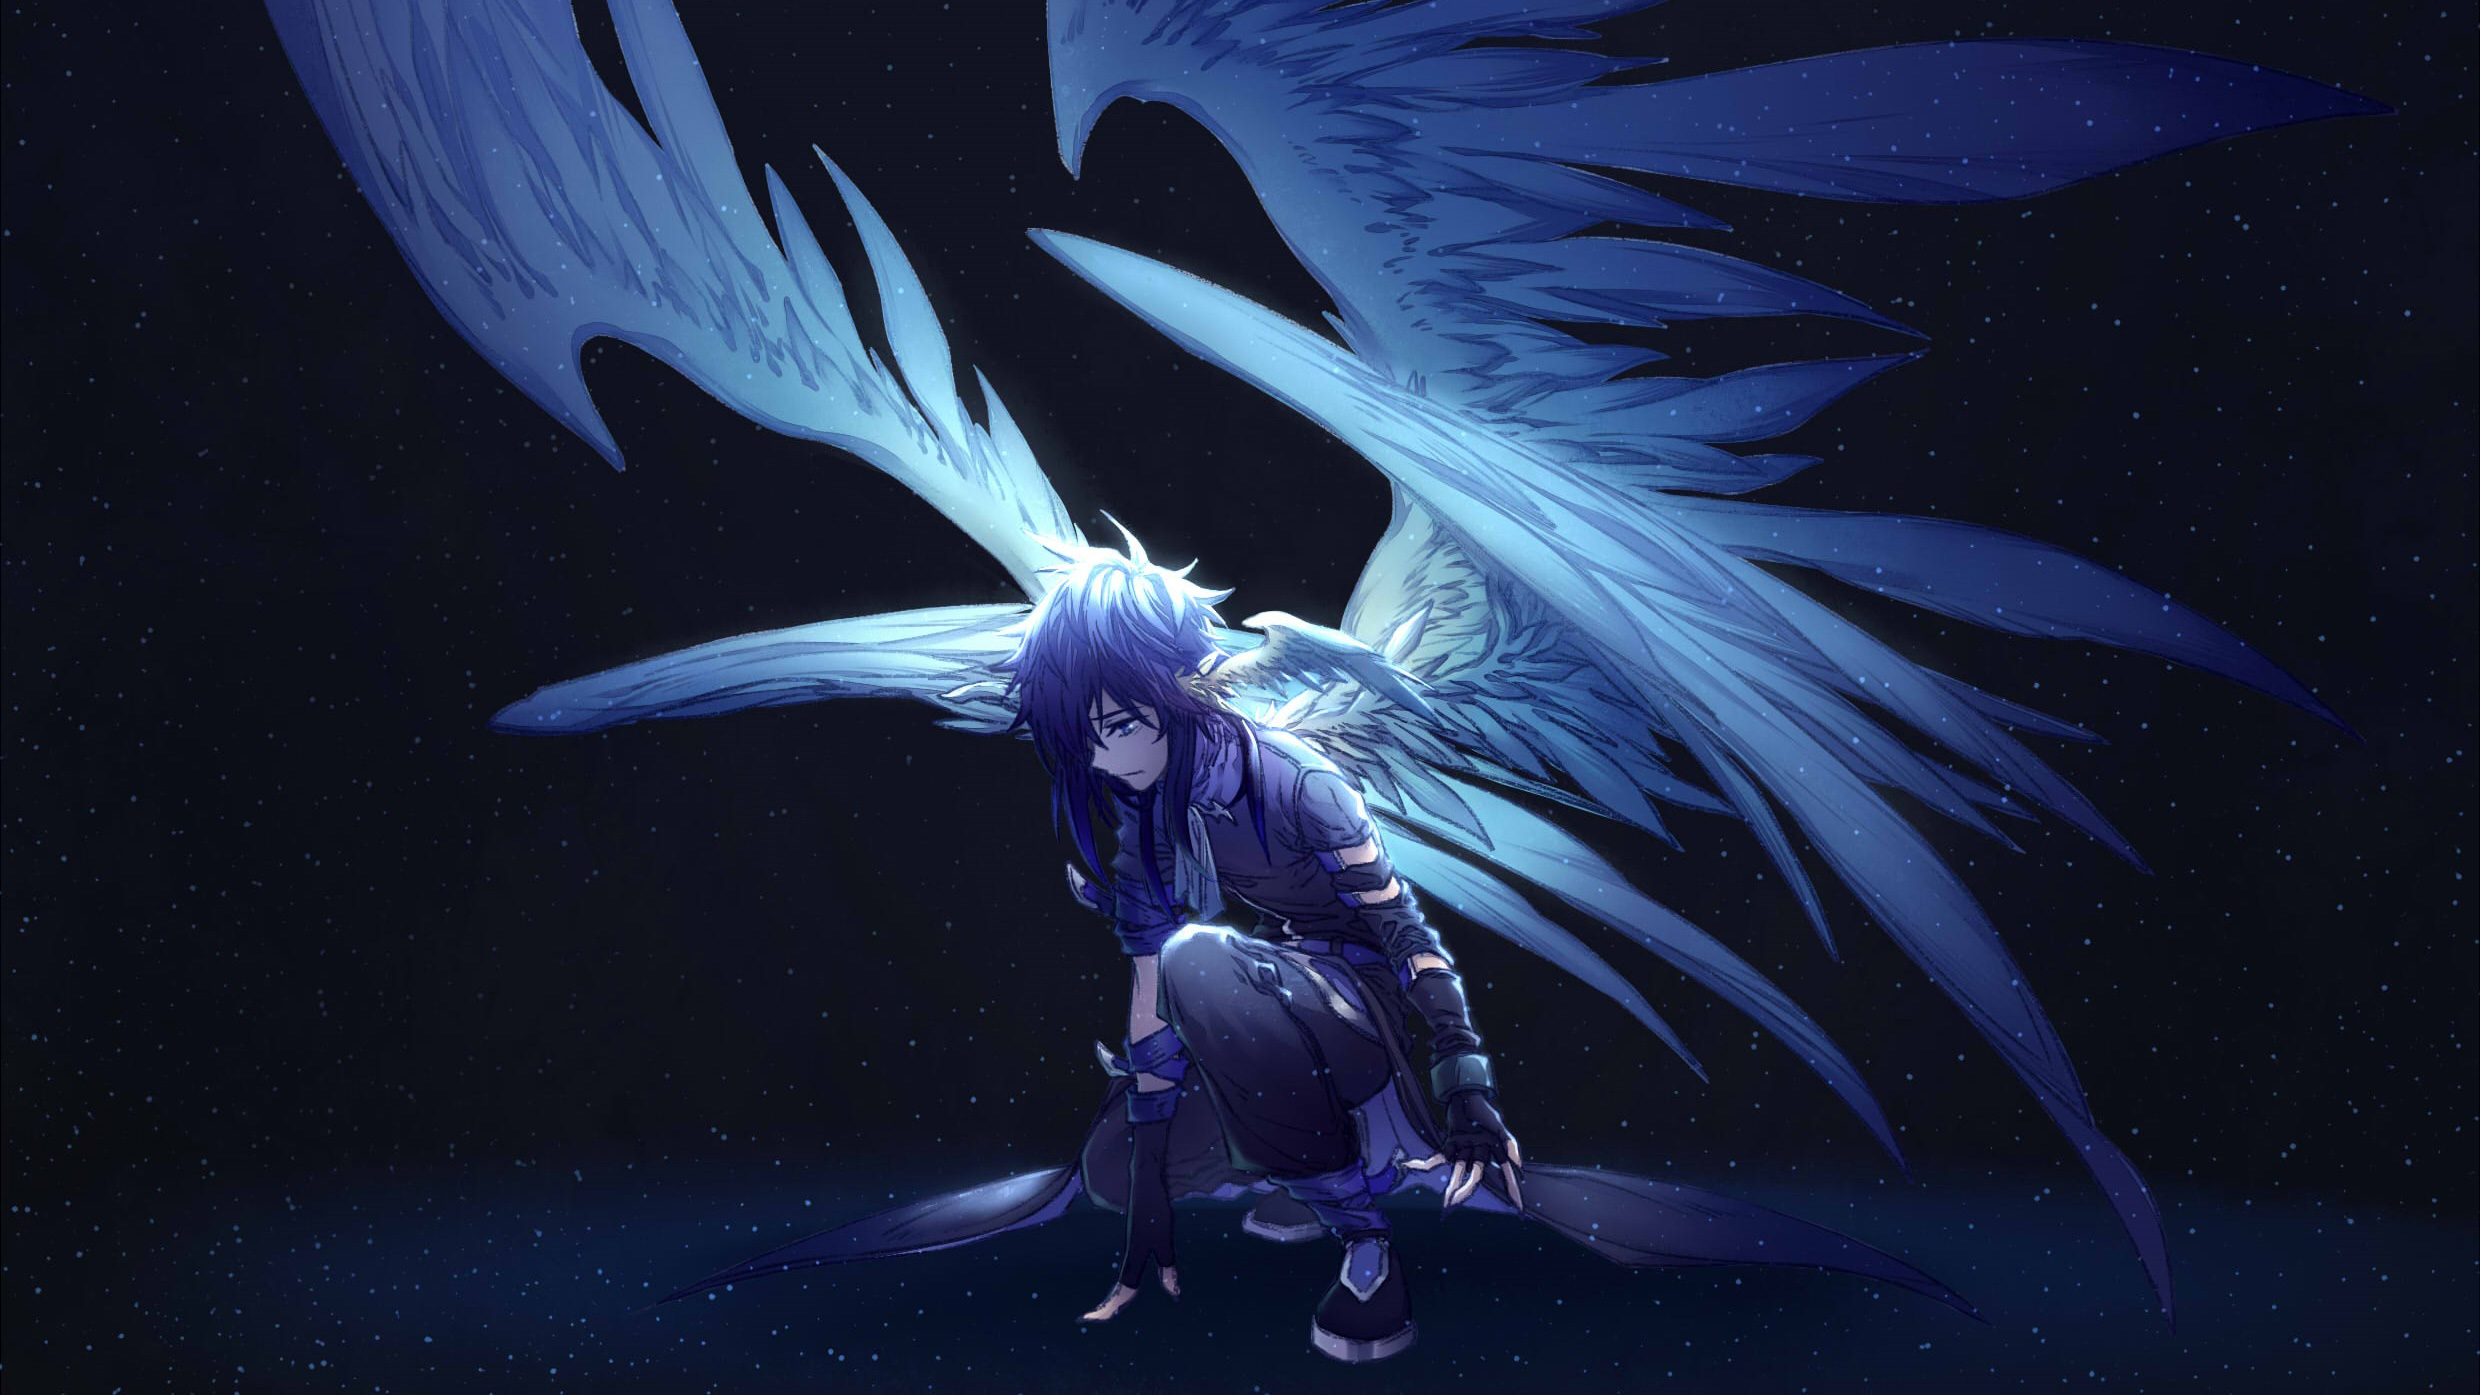 anime angel wallpaper,cg artwork,wing,fictional character,anime,graphic design